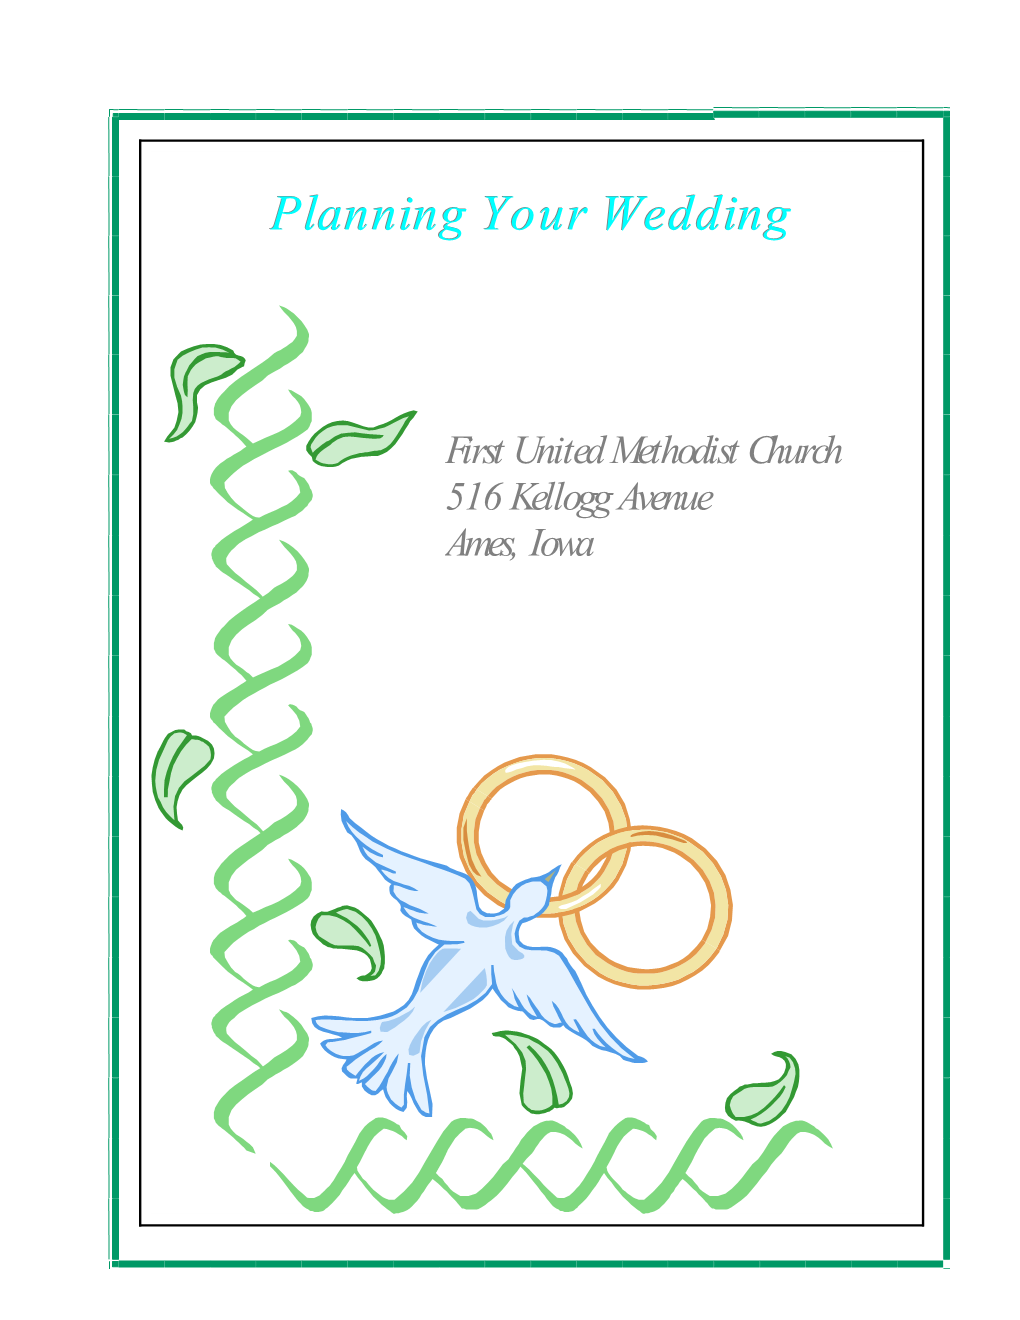 Planning Your Wedding at First United Methodist Church